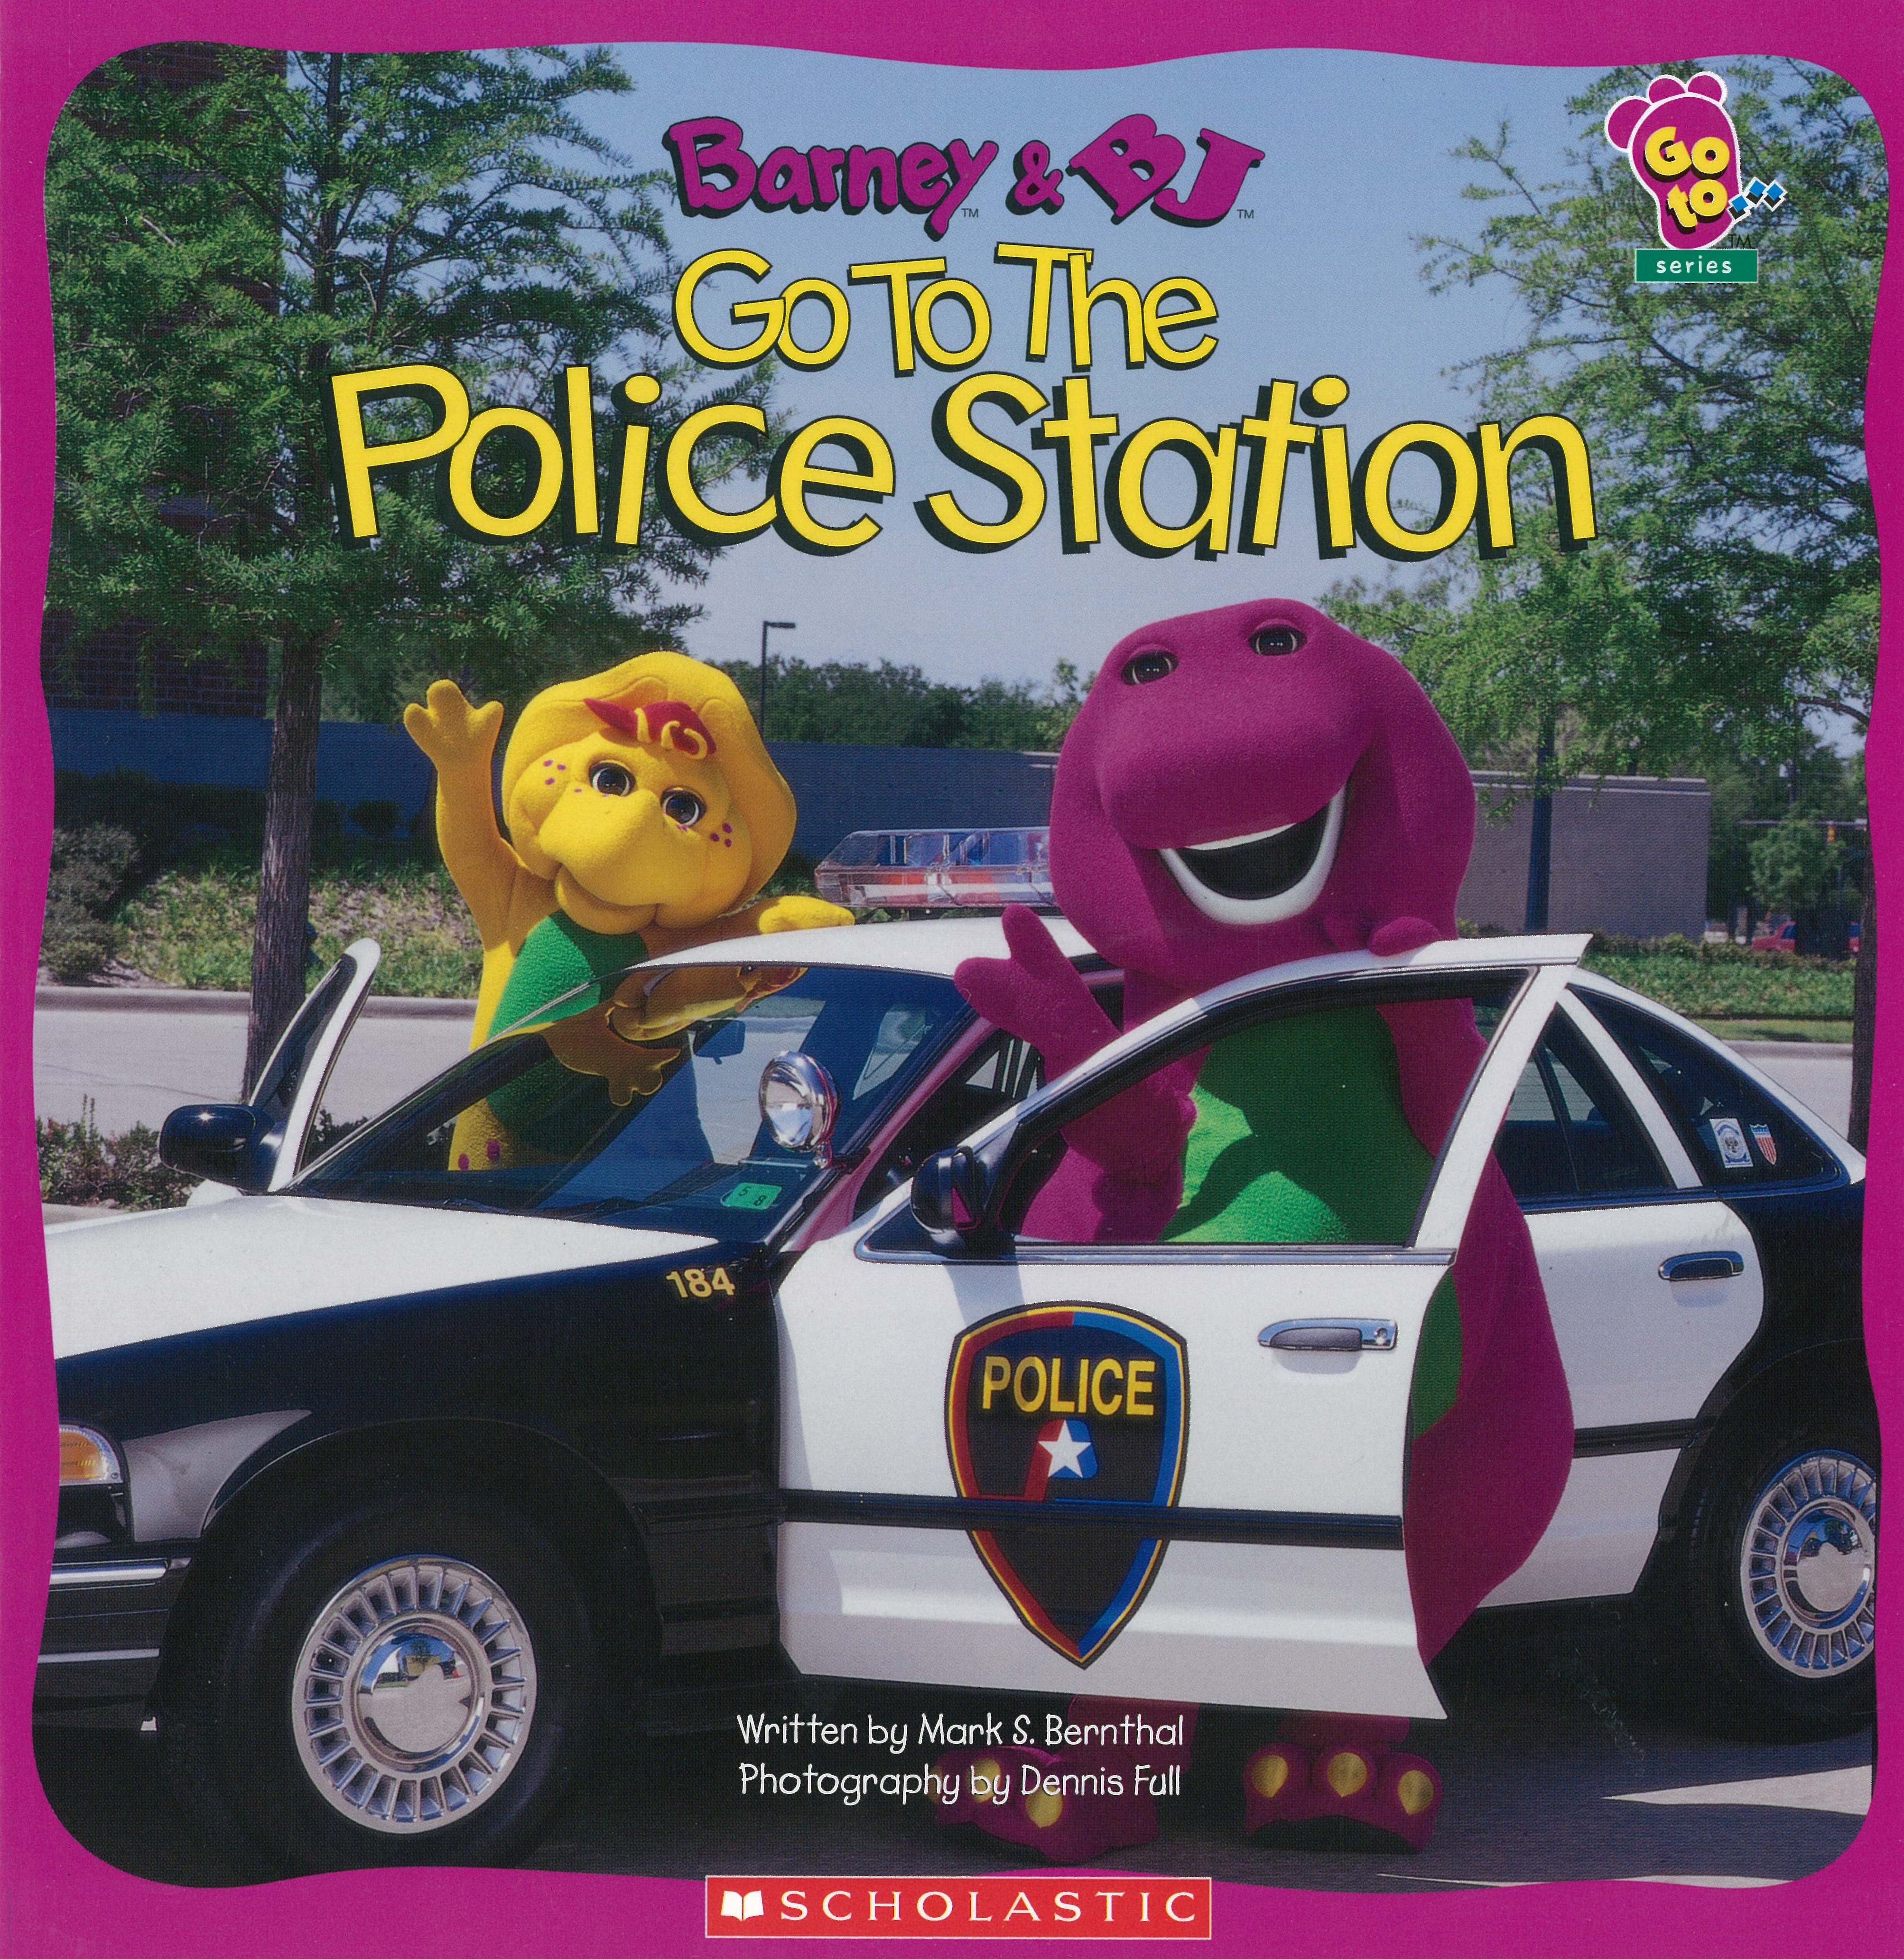 Barney &amp; Bj: Go To The Police Station